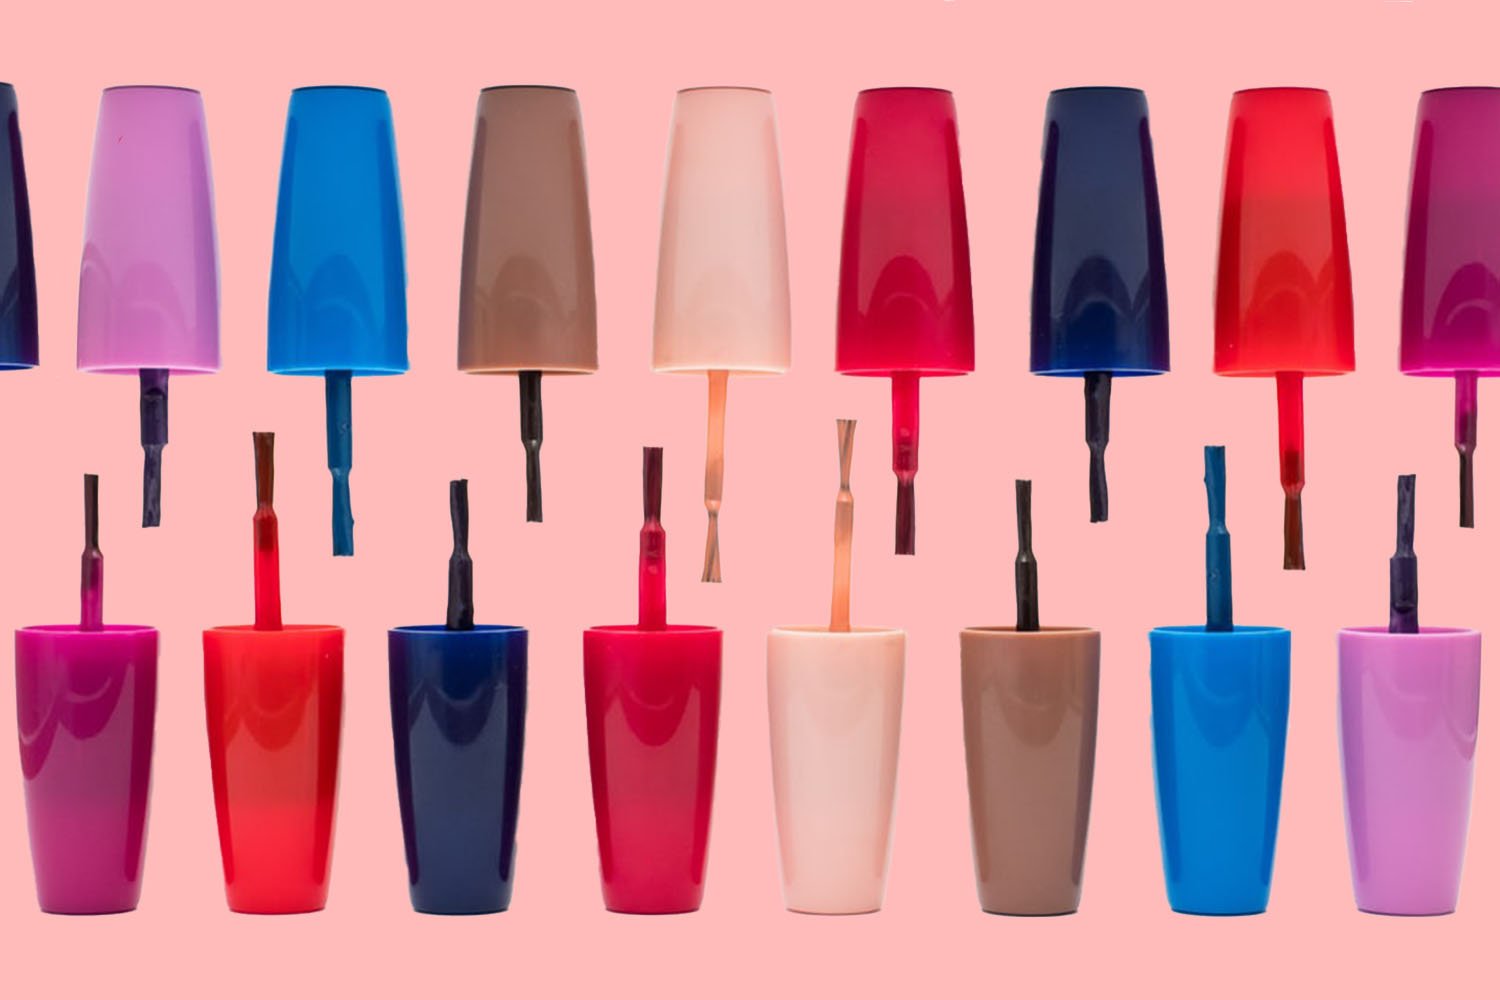 12 Non-toxic nail polish brands you can feel good about 